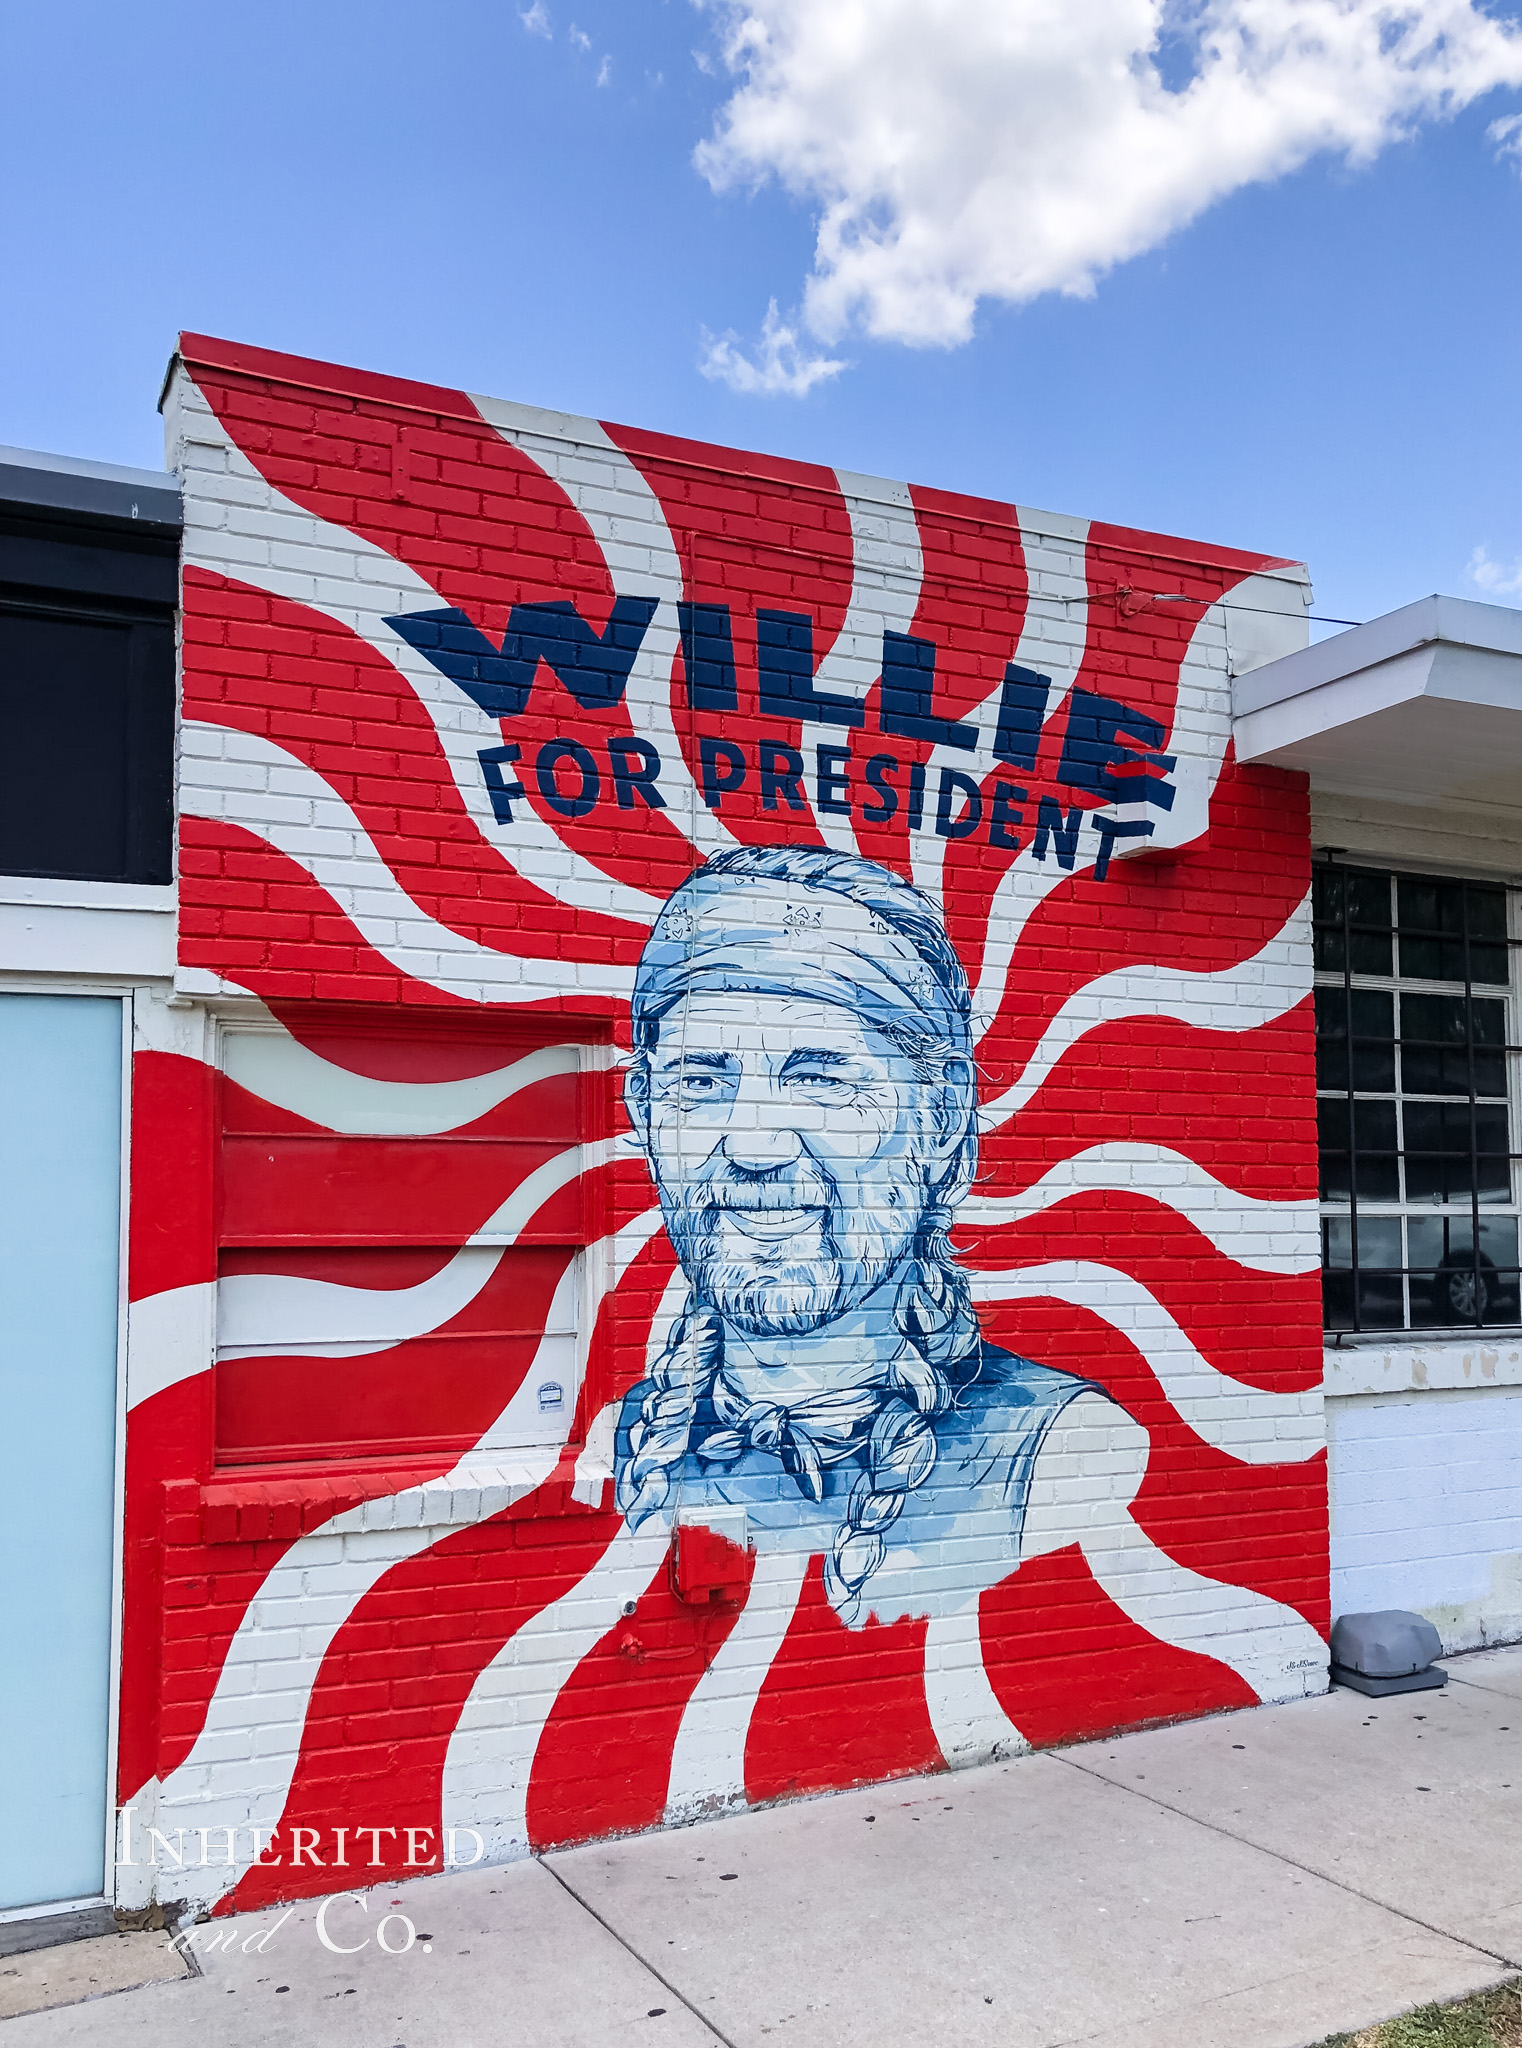 "Willie for President" mural in the South Congress neighborhood of Austin